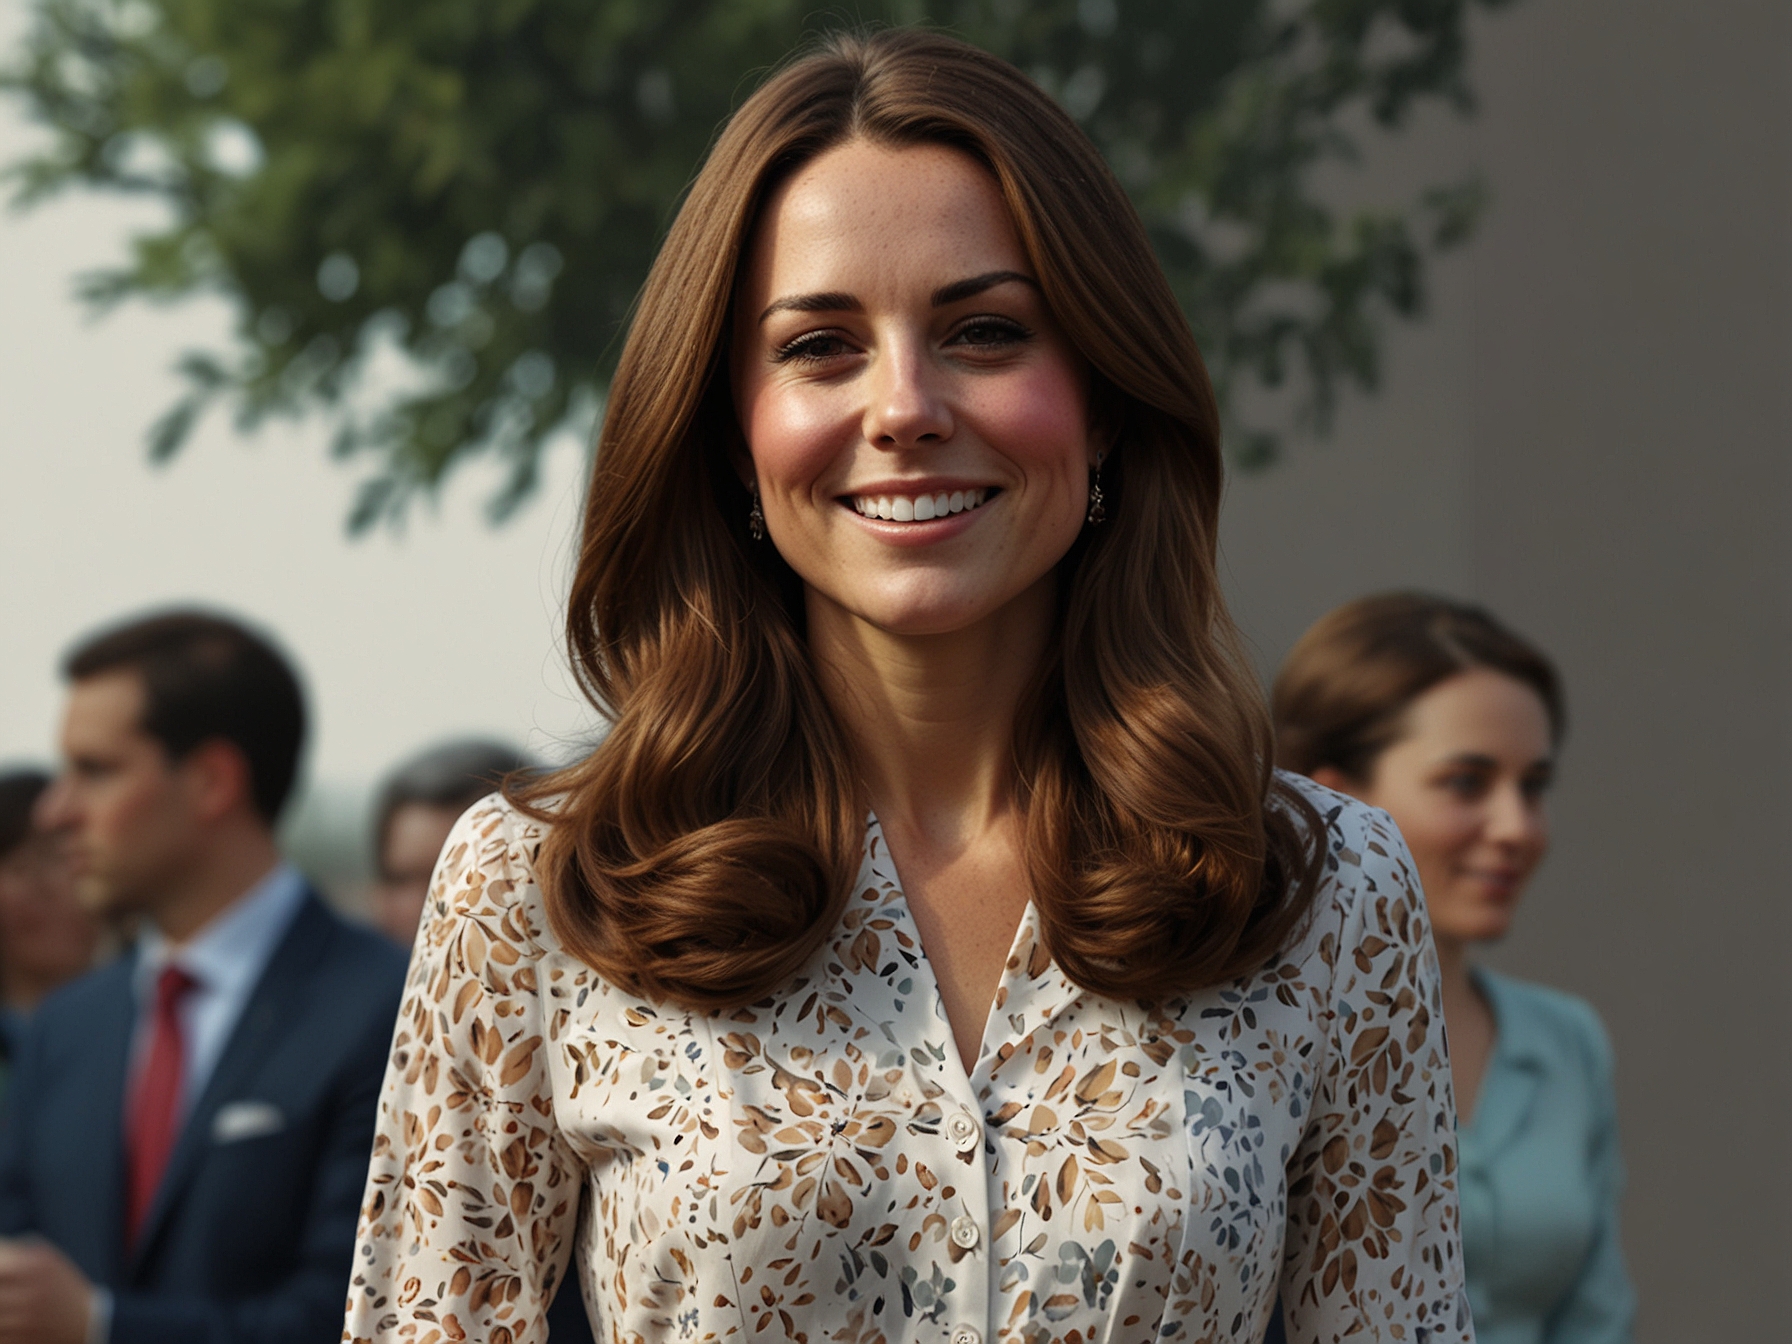 An illustration showing Kate Middleton at a public event, emphasizing her dignified and graceful public image amidst ongoing rumors and speculation.